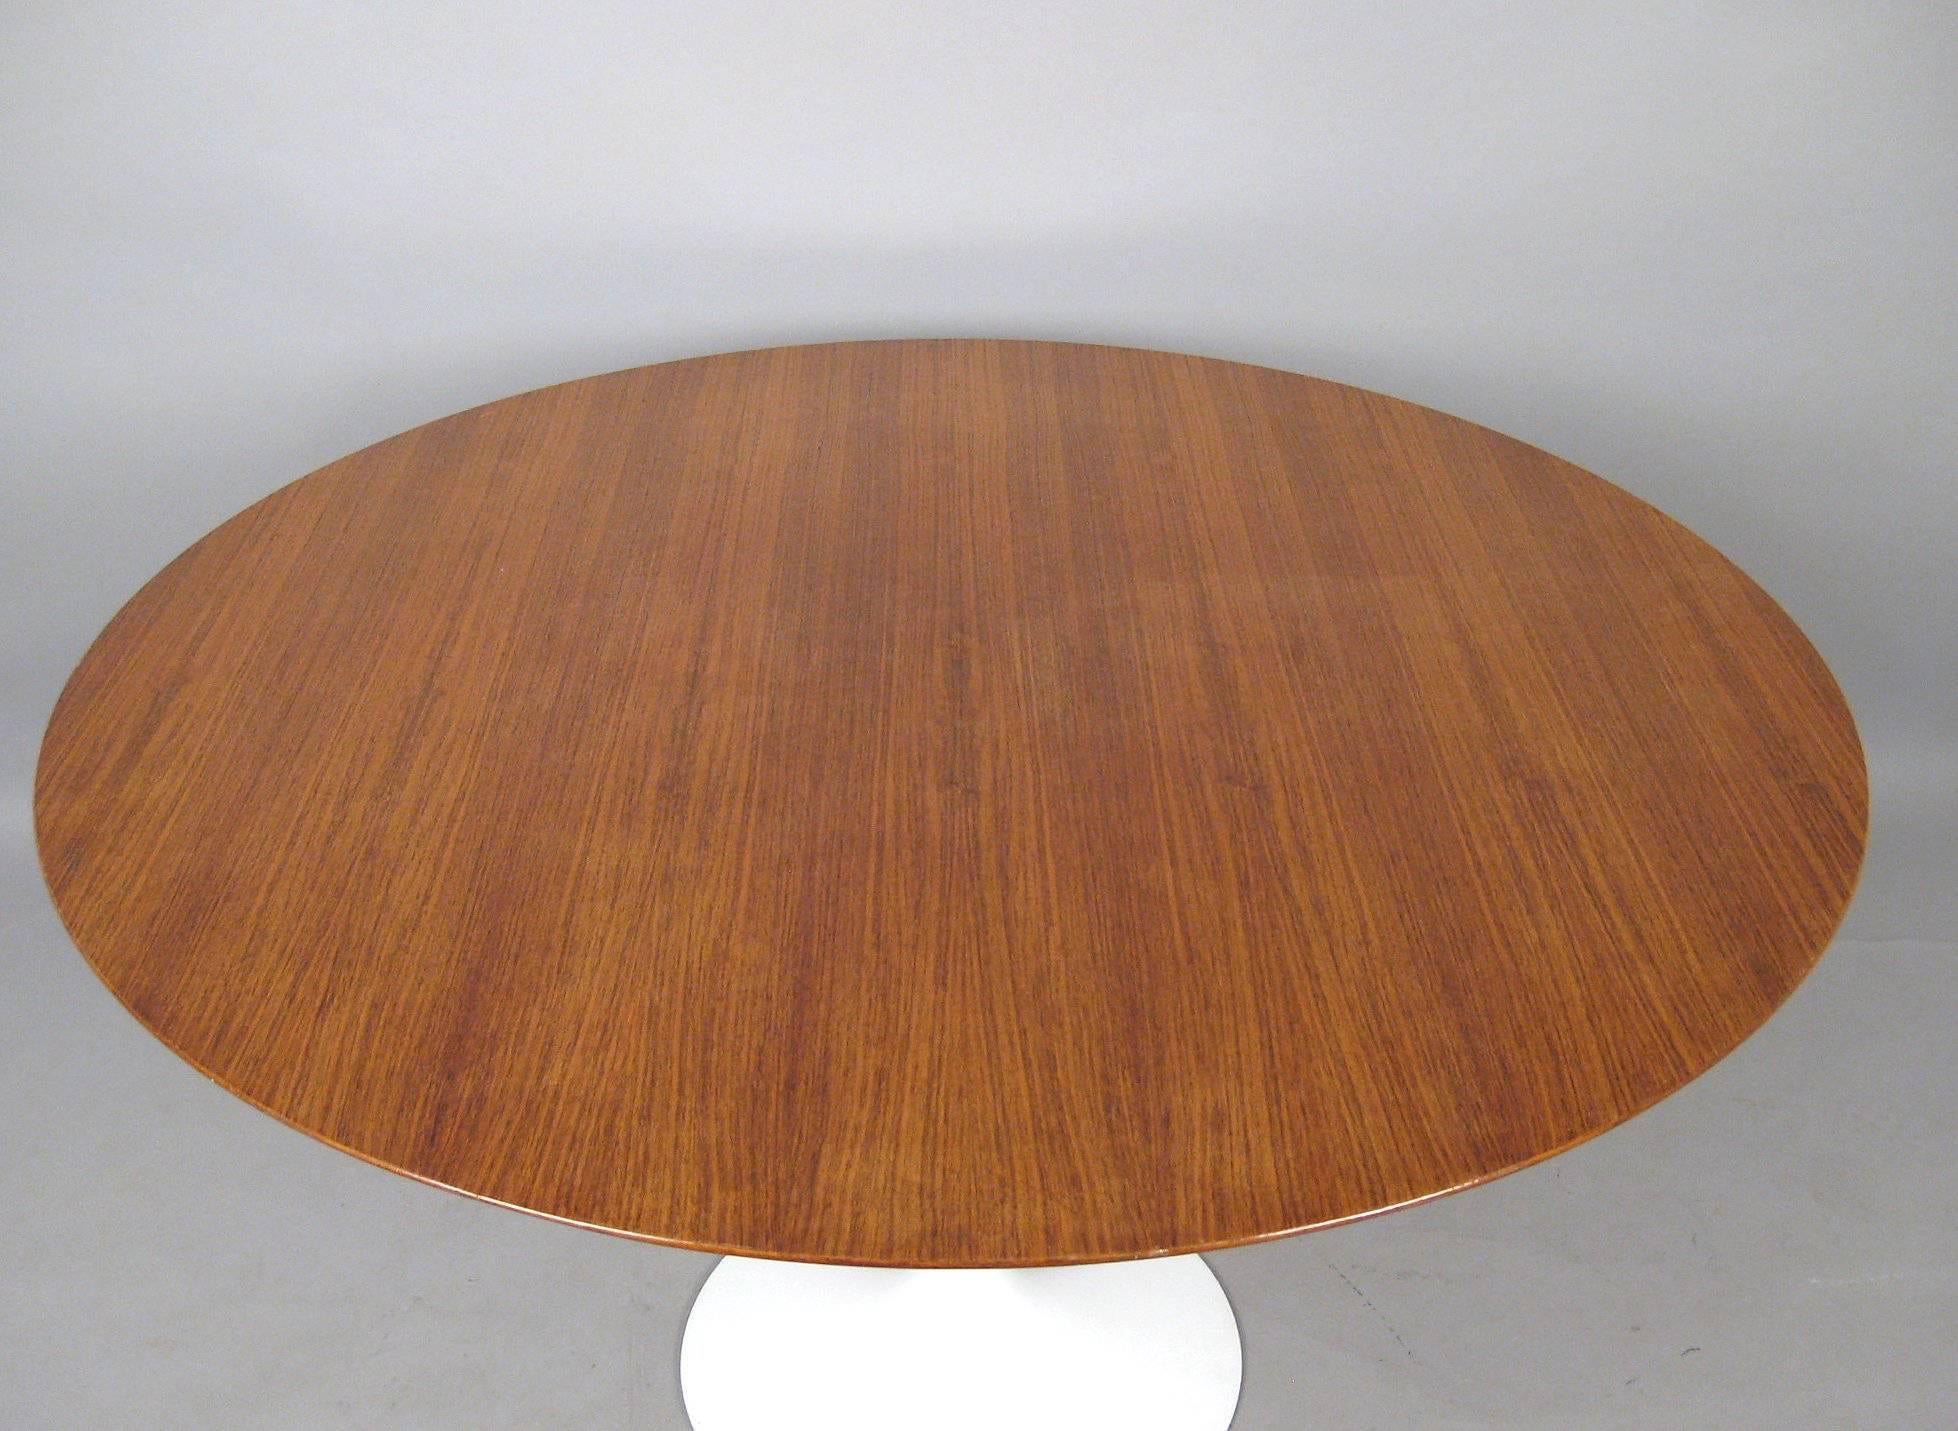 Eero Saarinen dining table from the Tulip series with beautiful East Indian rosewood top.
Manufactured by Knoll, circa 1960.
White lacquered cast aluminium.
Marked on underside of base.